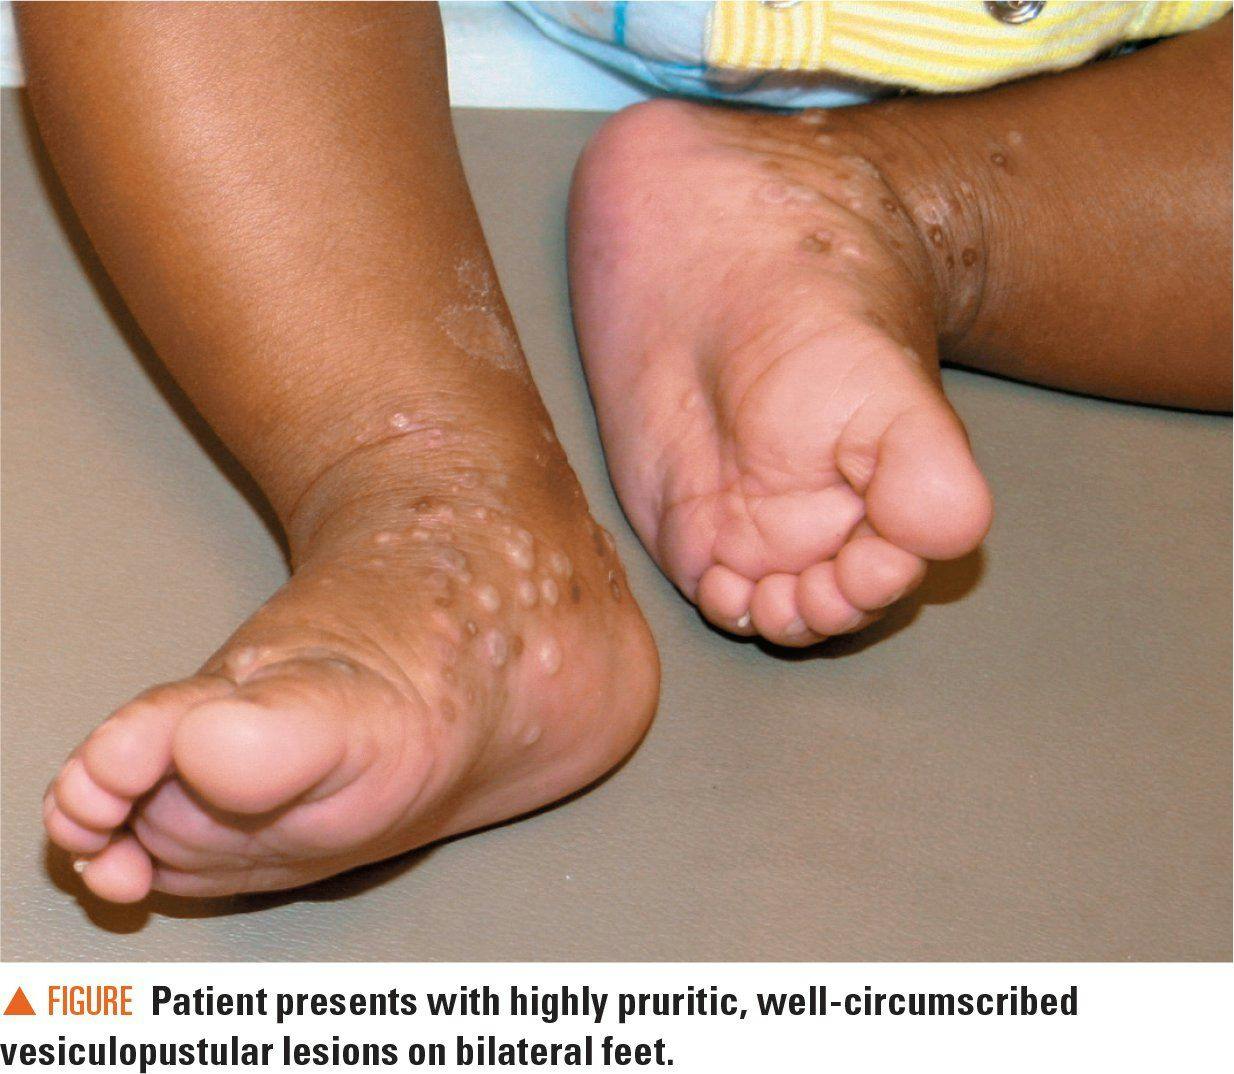 Patient presents with highly pruritic, well-circumscribed vesiculopustular lesions on bilateral feet